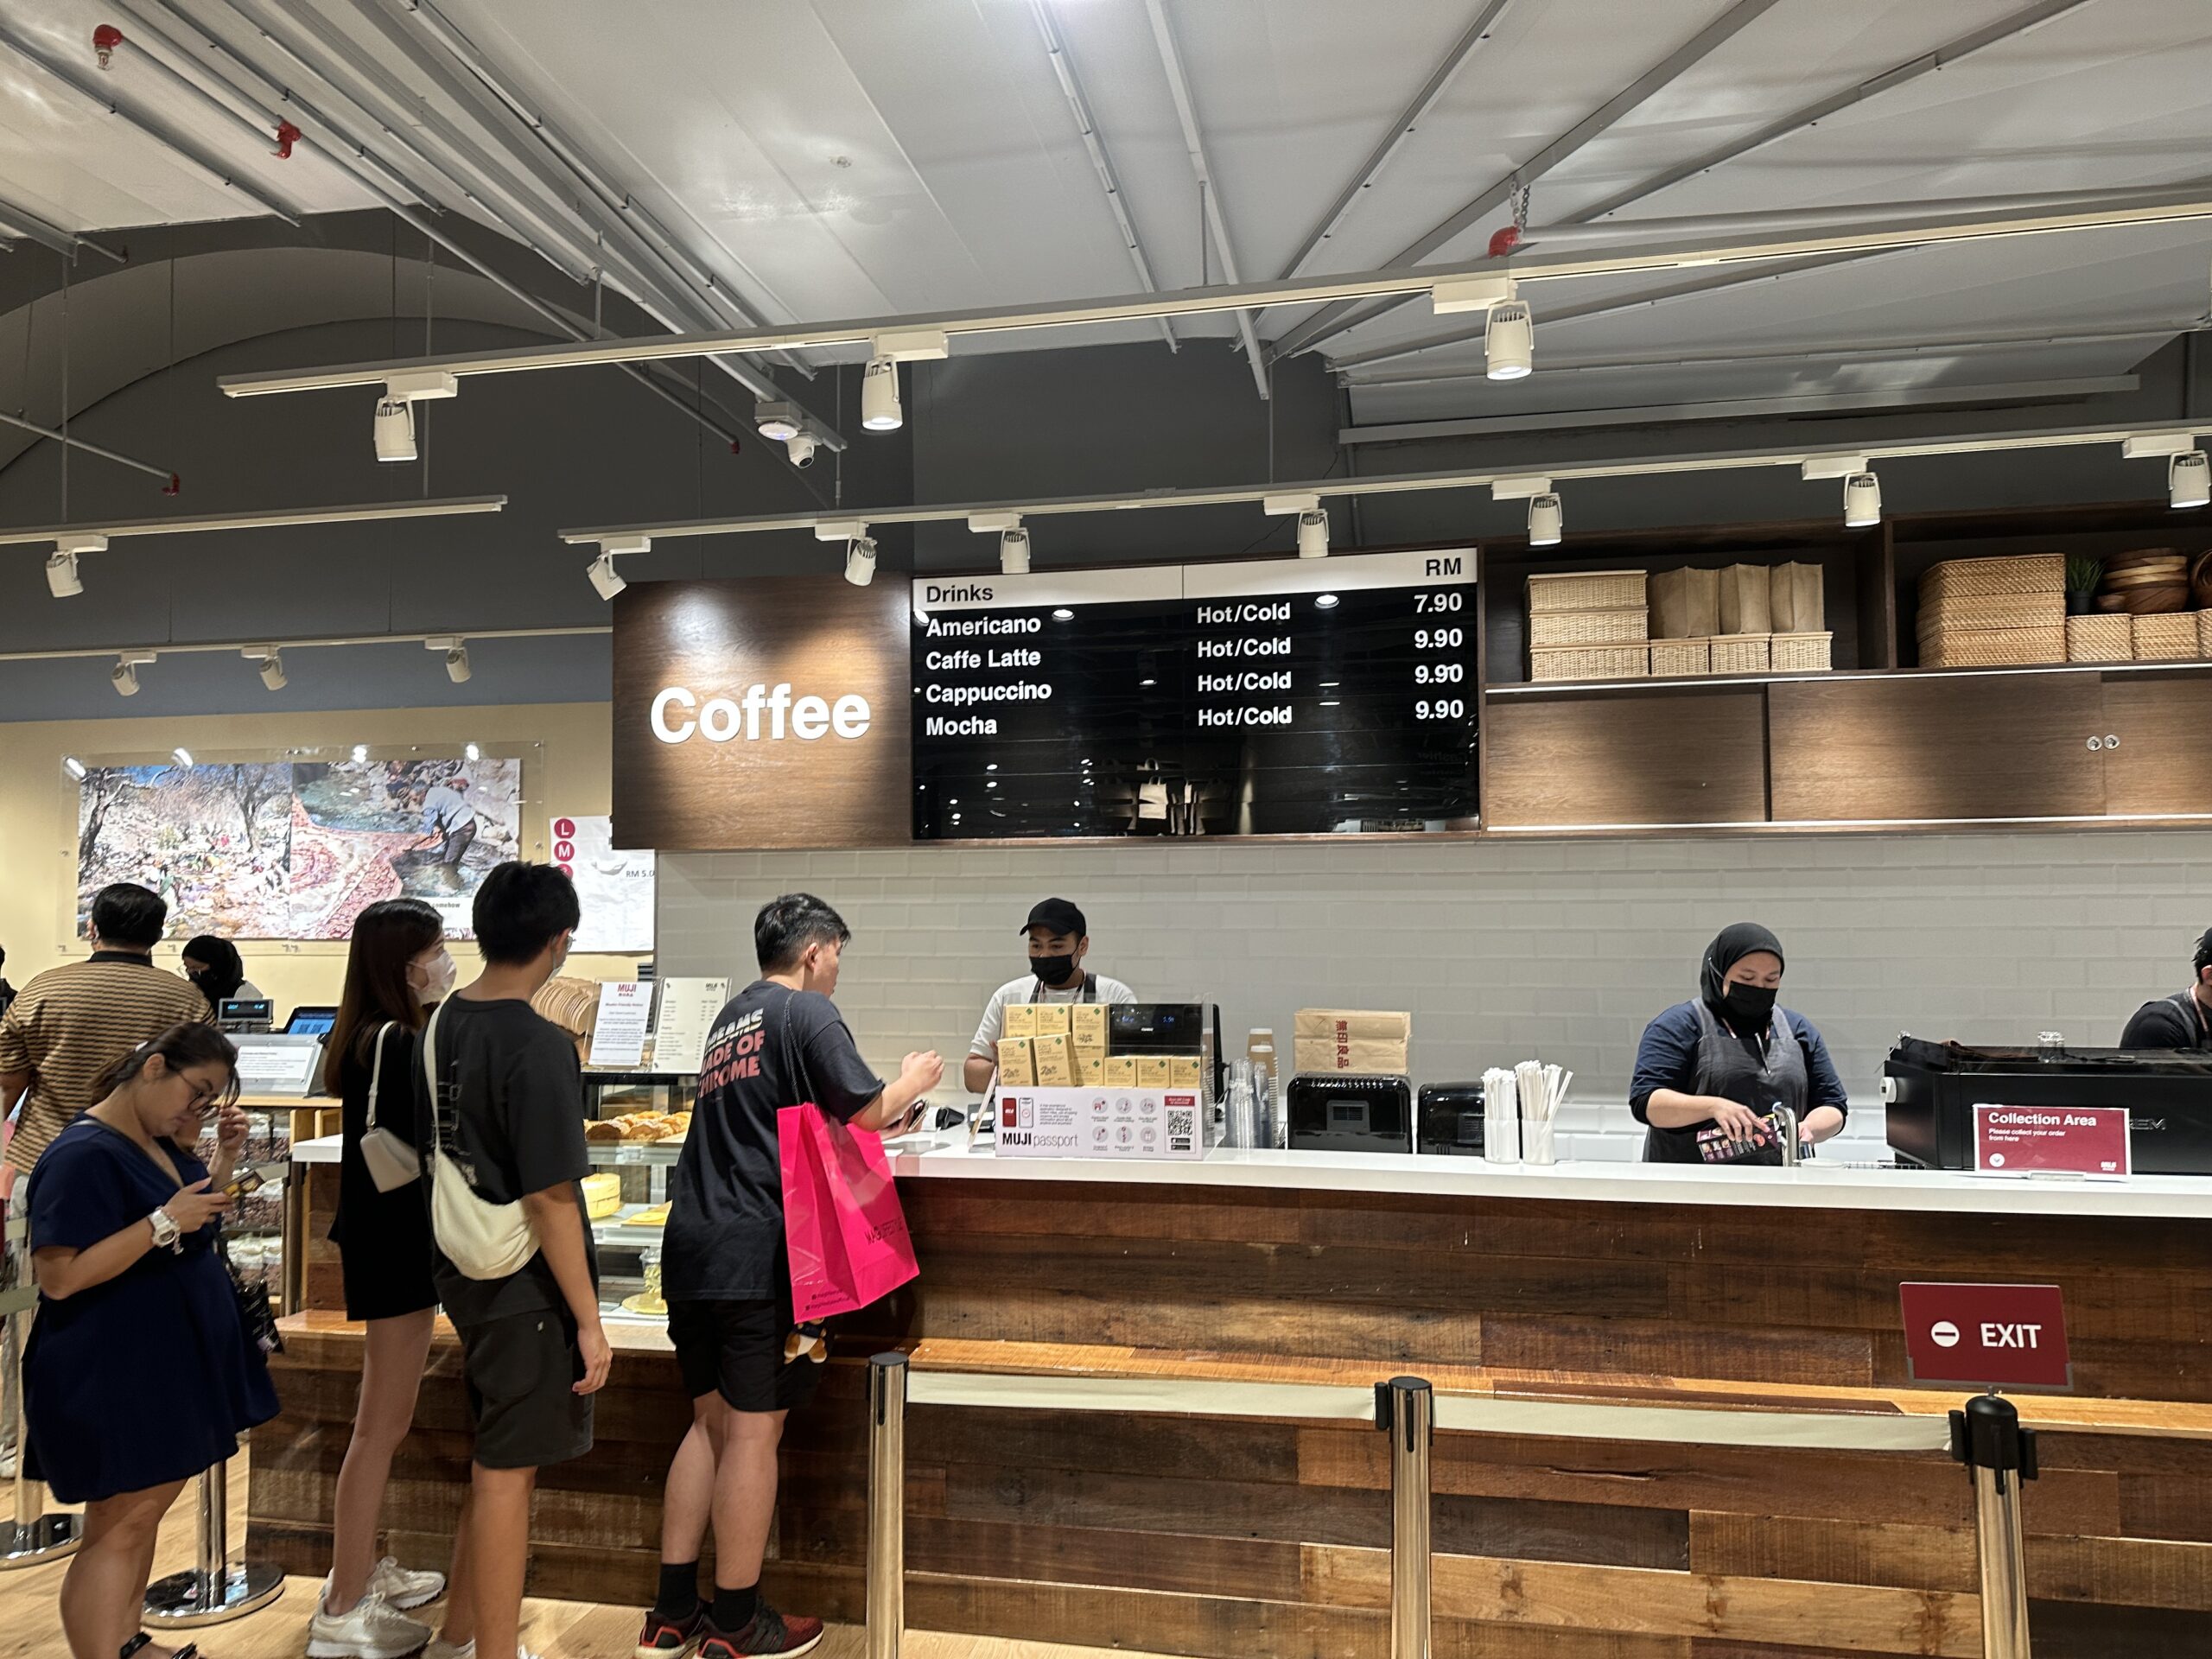 We tried the first ever muji café at 1 utama and here's what we think | weirdkaya